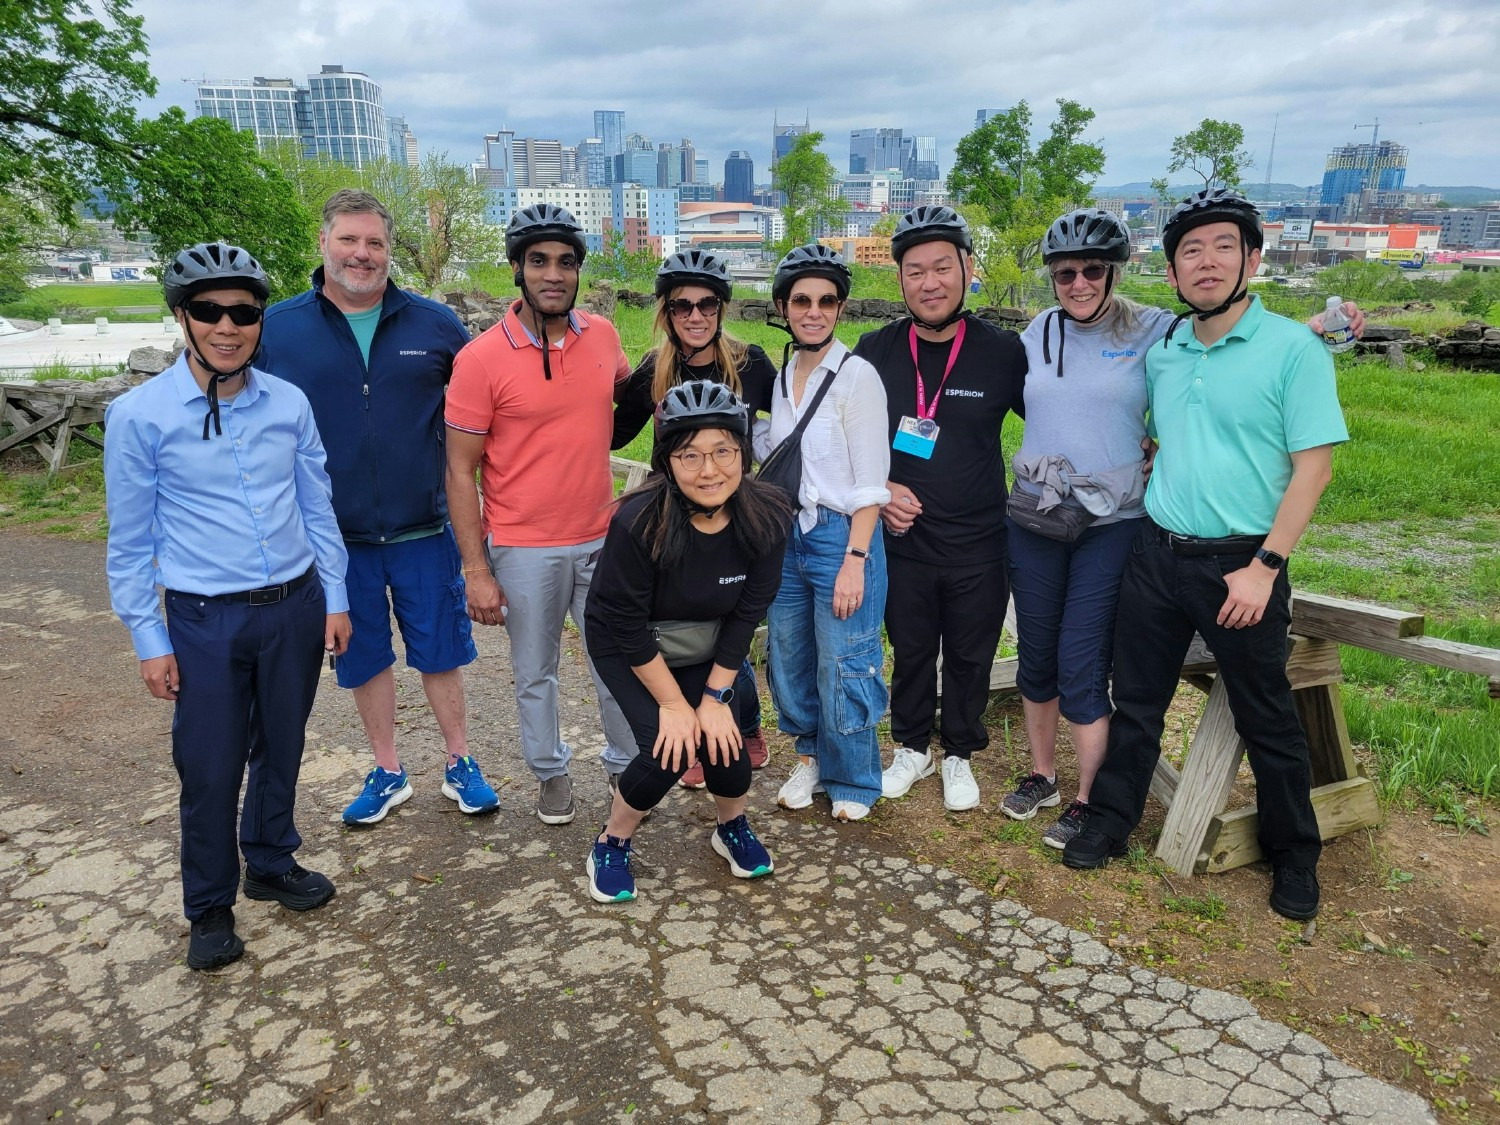 While in Nashville for an all-company meeting, part of Esperion's Clinical team took a 16.5-mile bike tour.